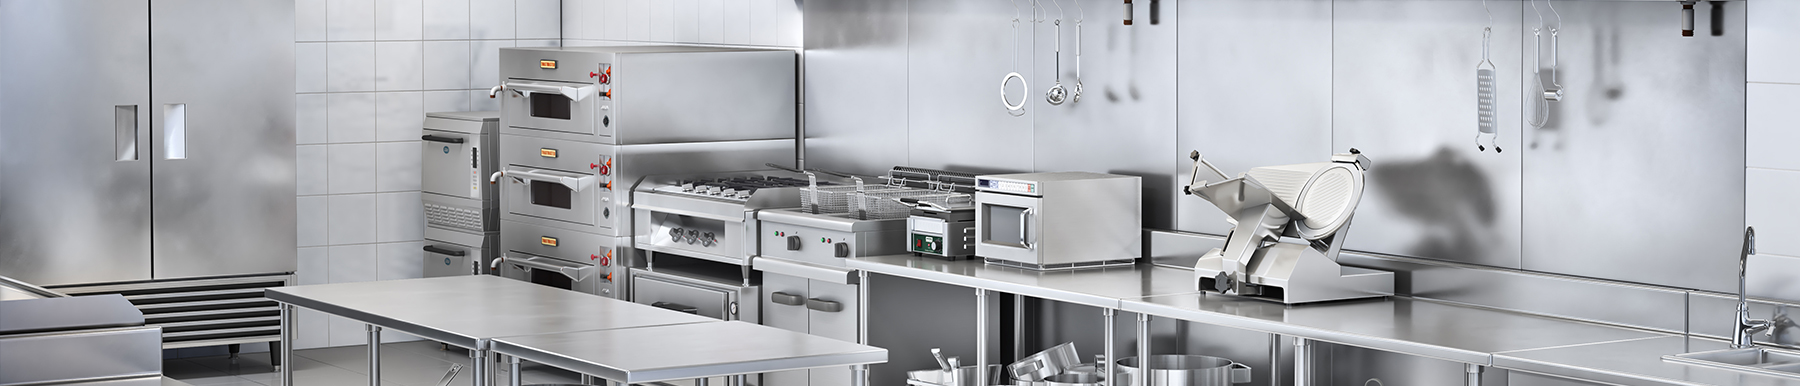 Catering Equipment Suppliers Near Barnsley | H2 Catering Equipment Catering Equipment